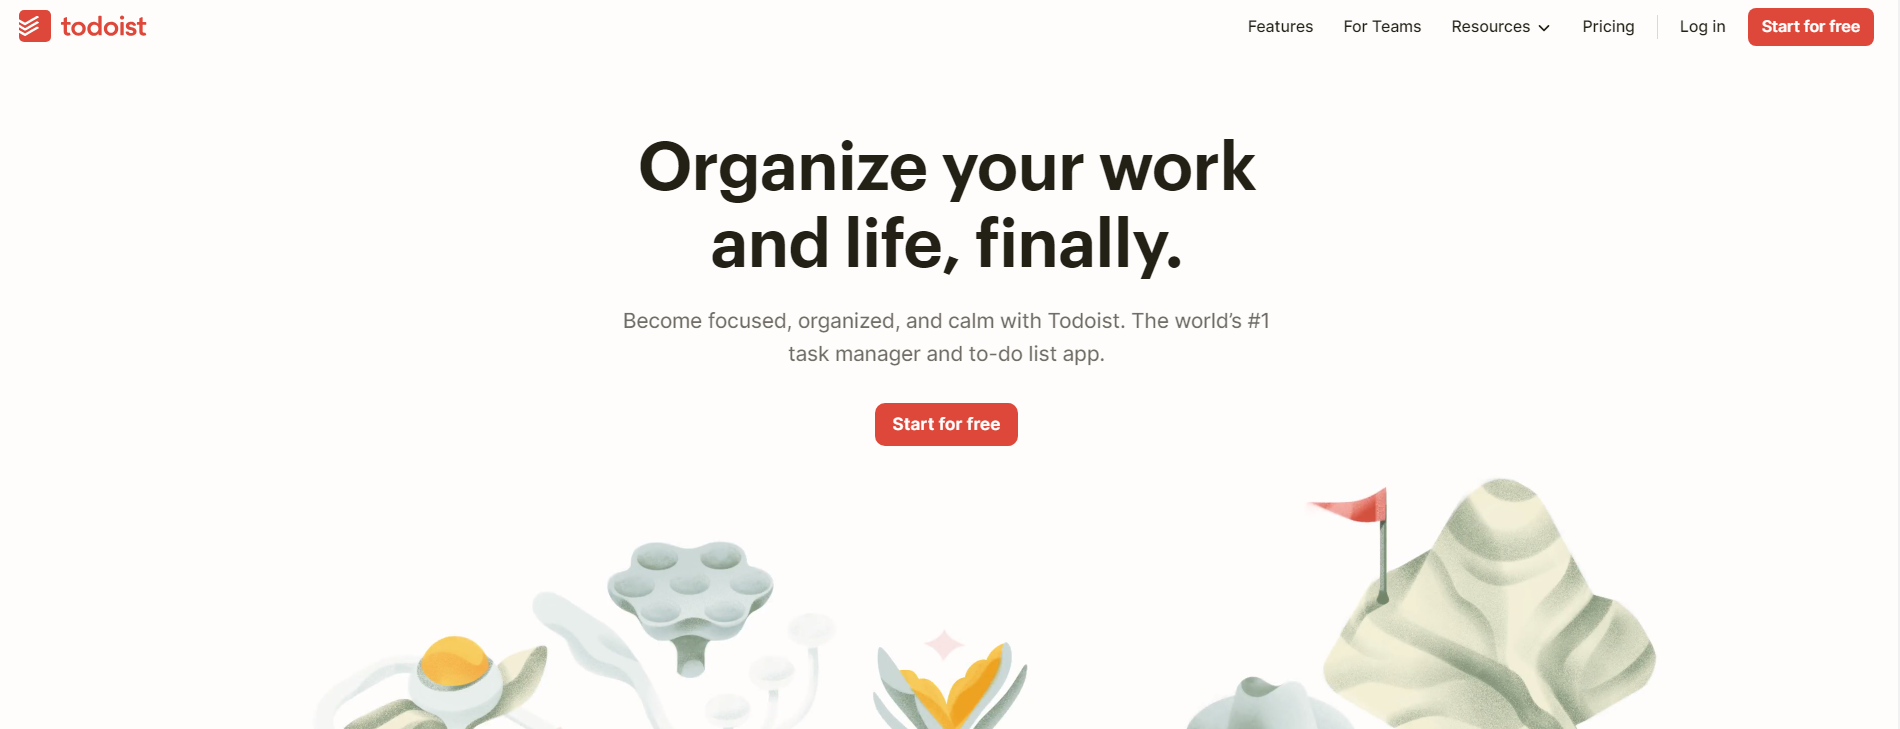 advantages of employee productivity Software